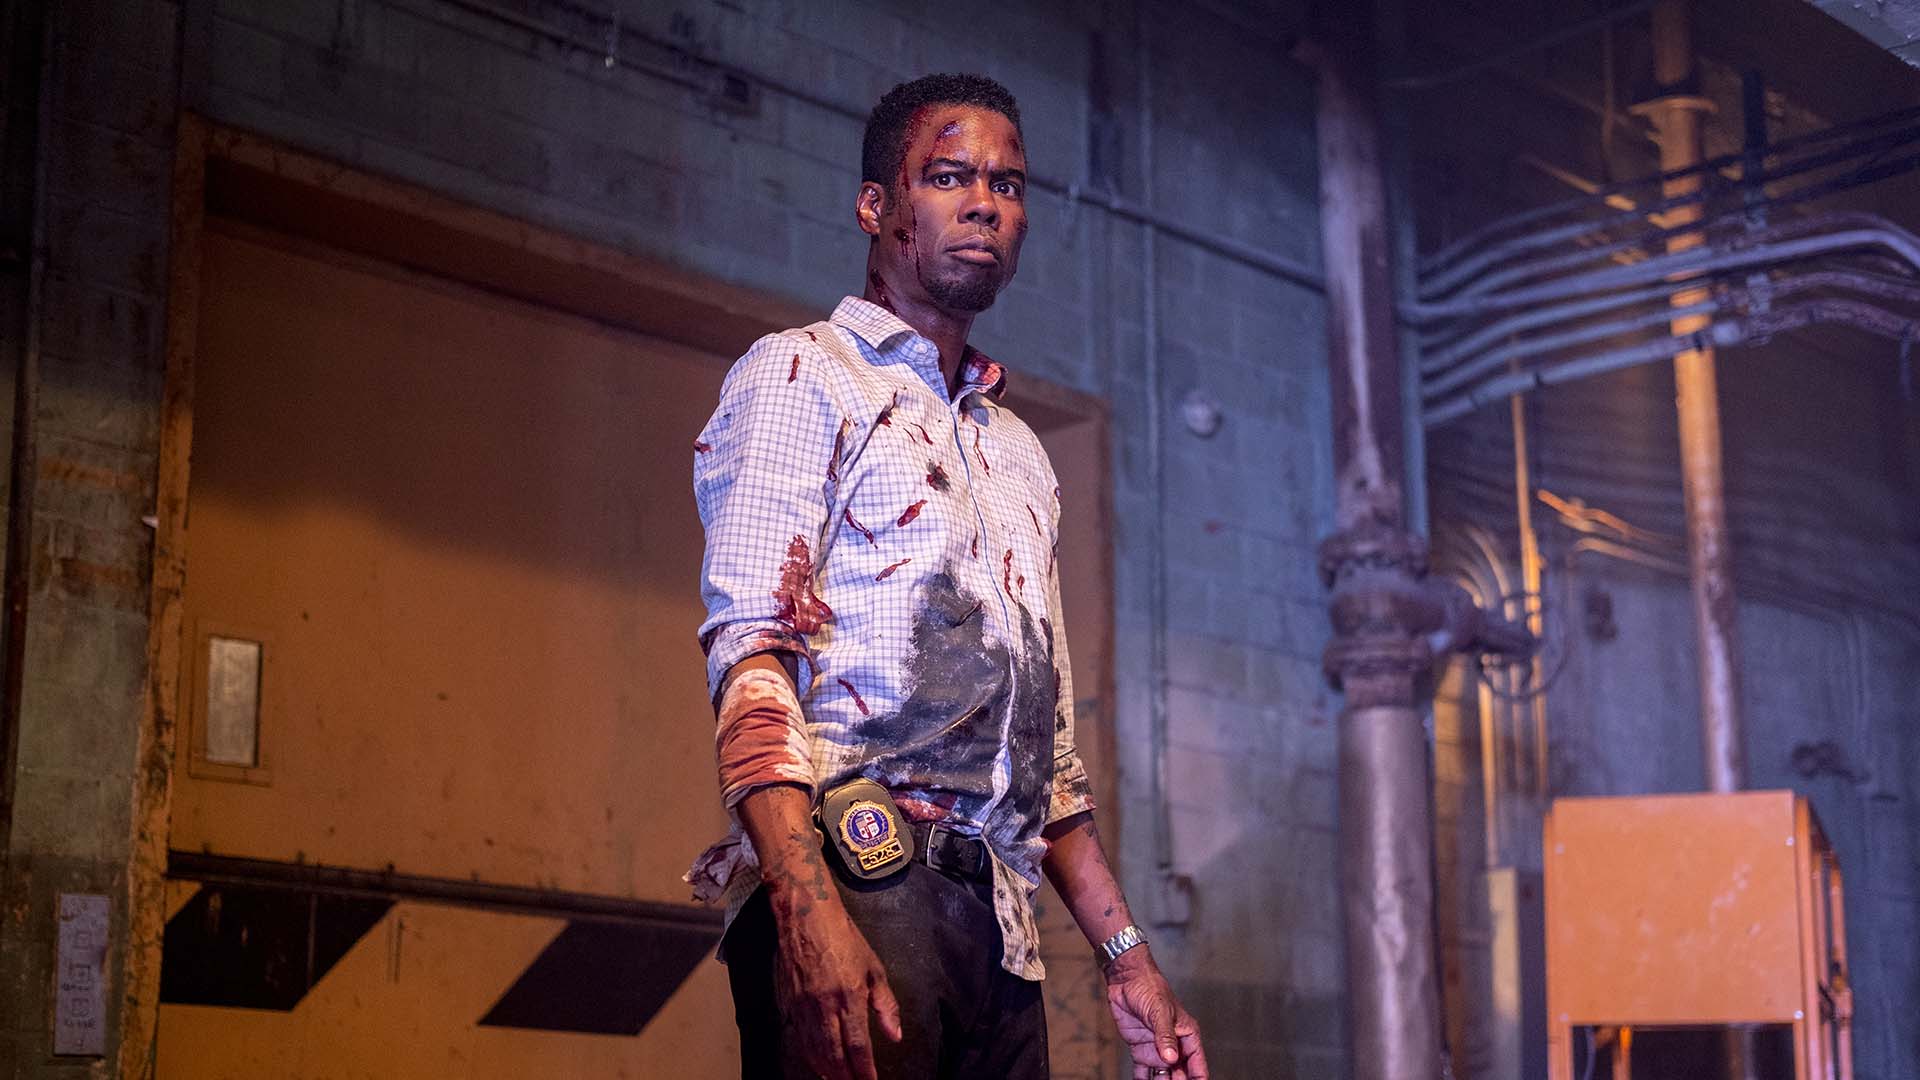 The 'Saw' Franchise Returns with Chris Rock, Samuel L Jackson and More Gruesome Murders